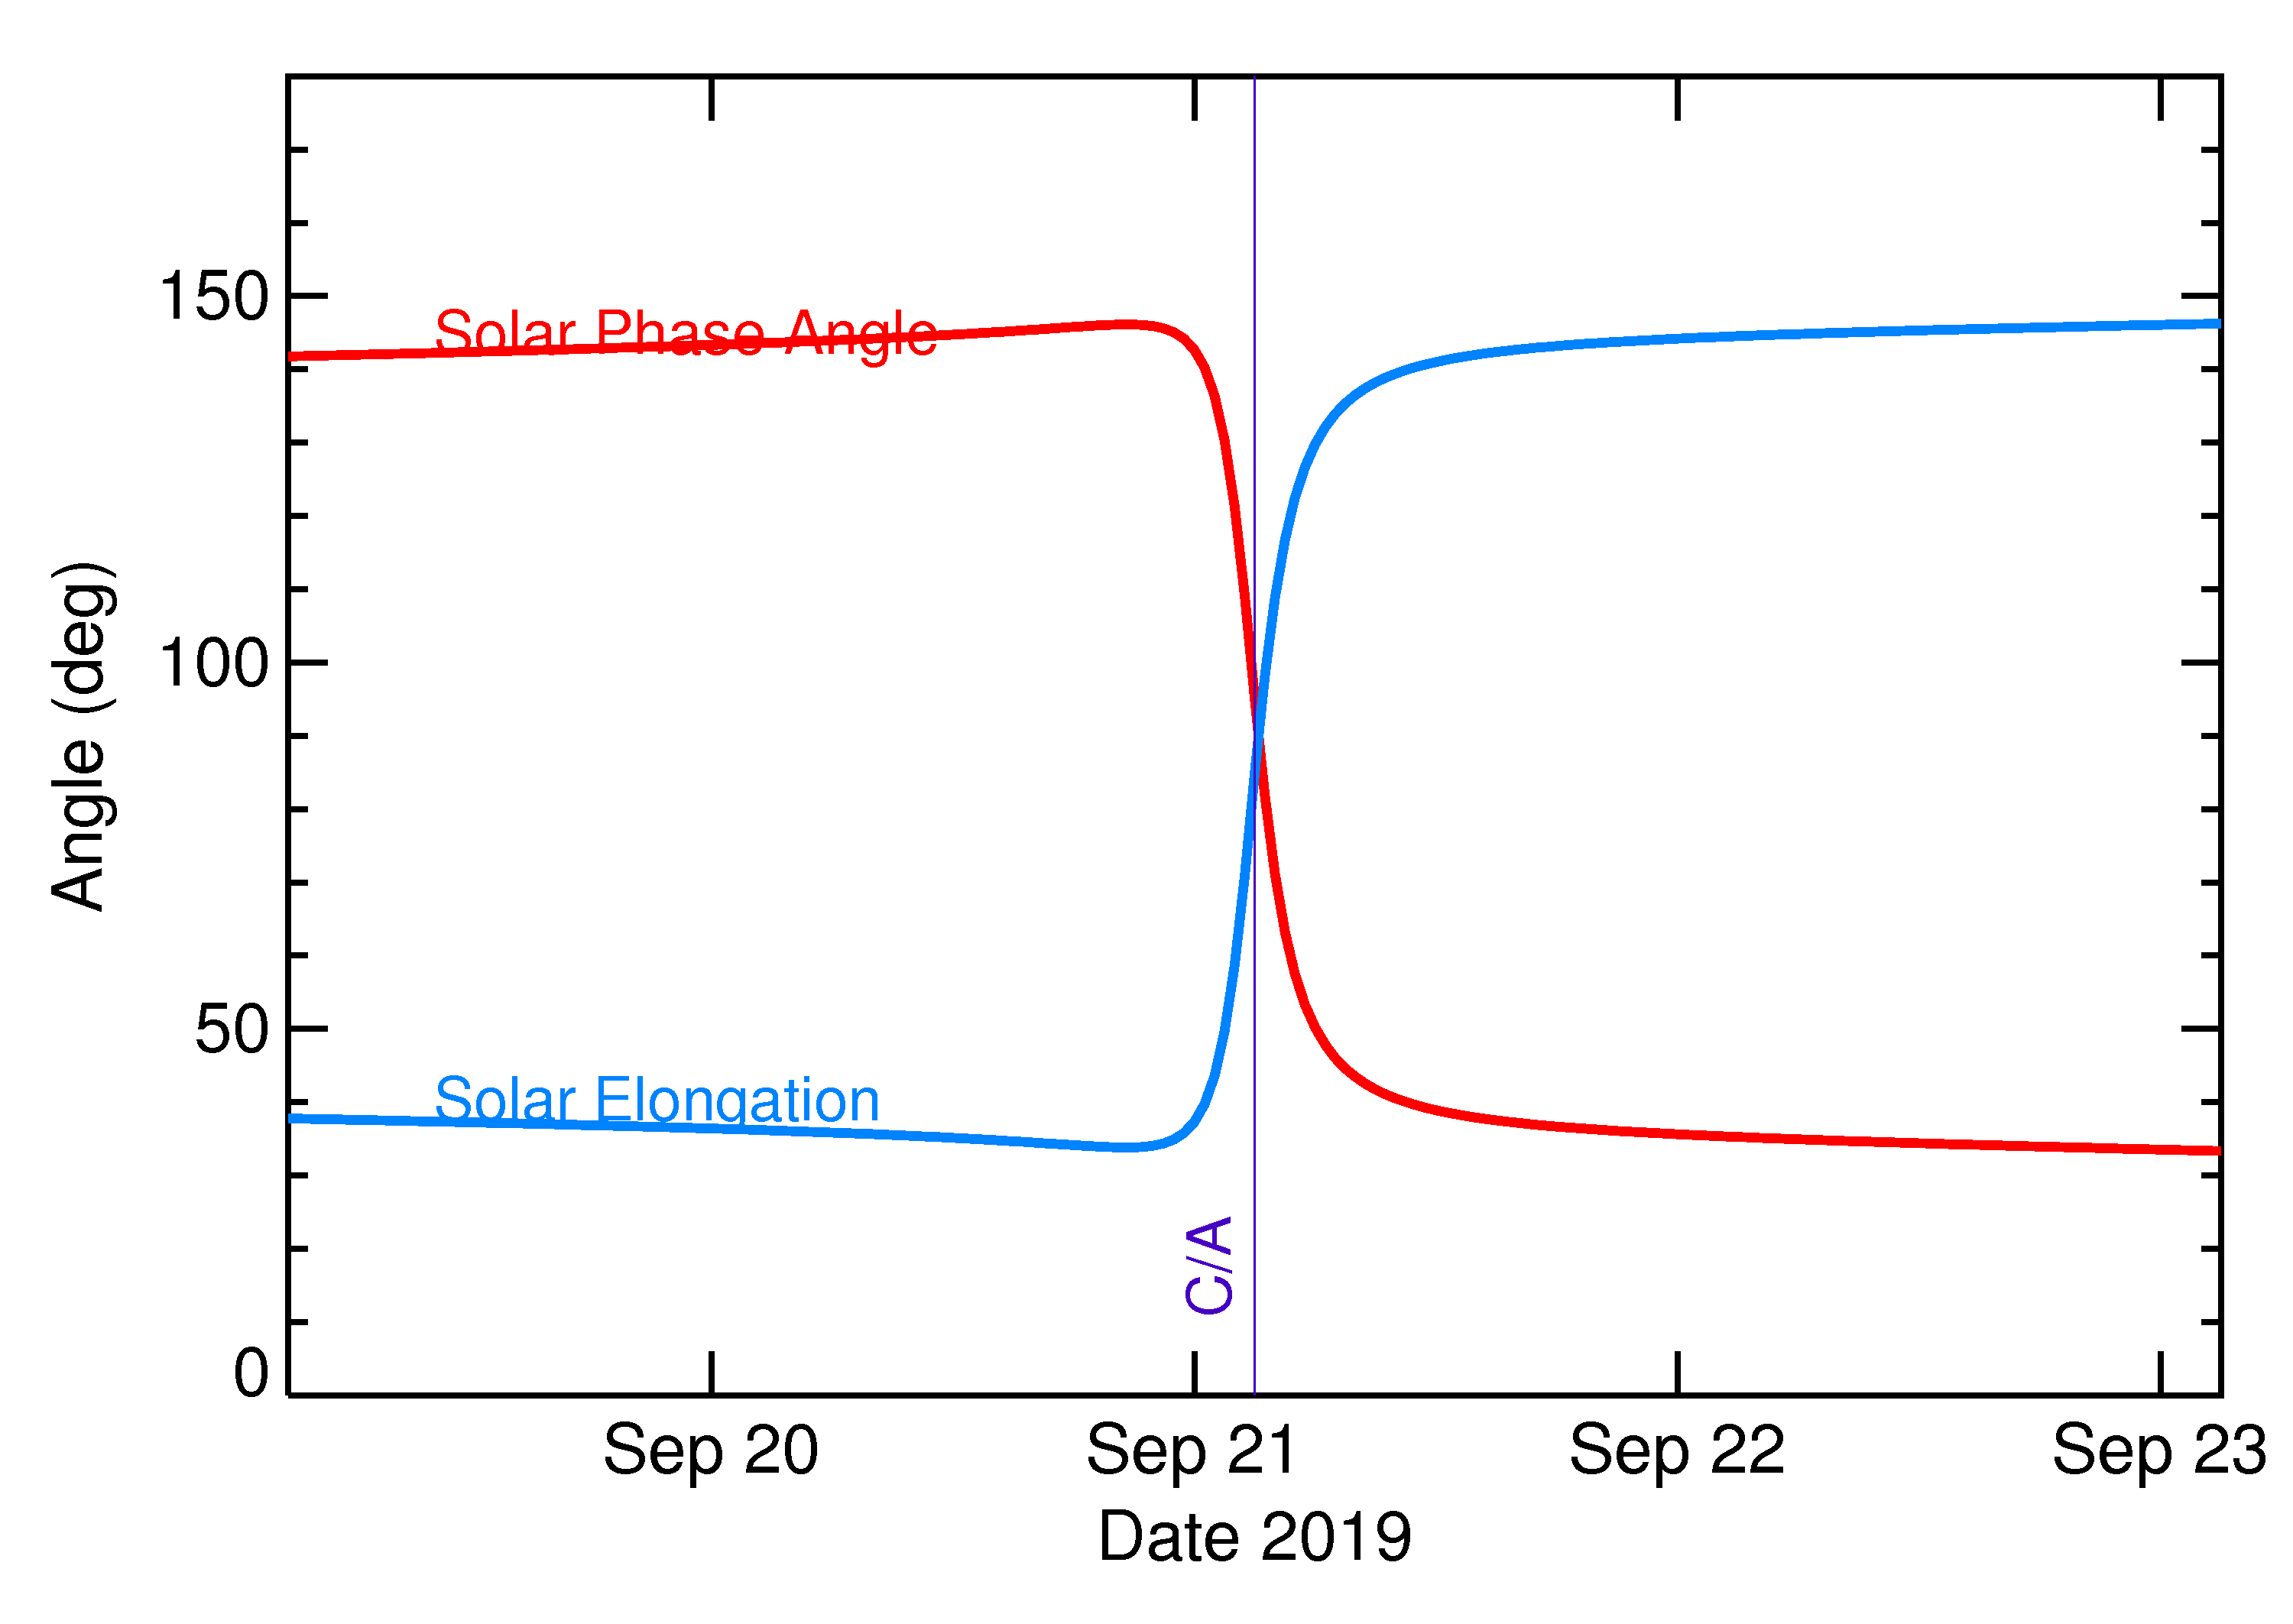 Solar Elongation and Solar Phase Angle of 2019 SU2 in the days around closest approach